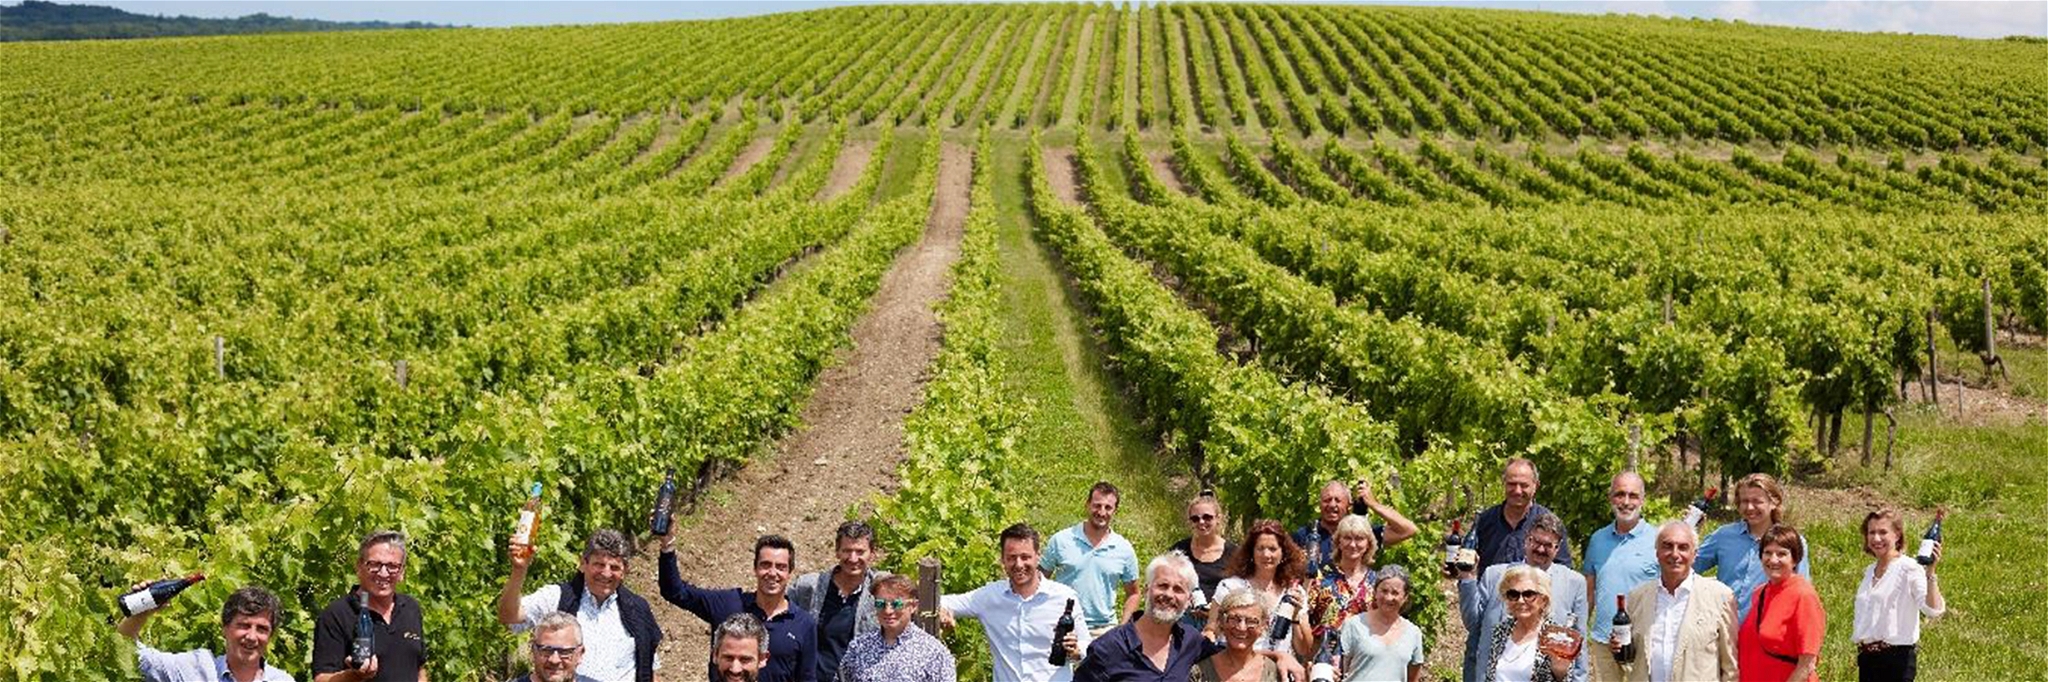 Vignobles and Signatures is a collective consisting of 17 family-owned wine producers located all over France.